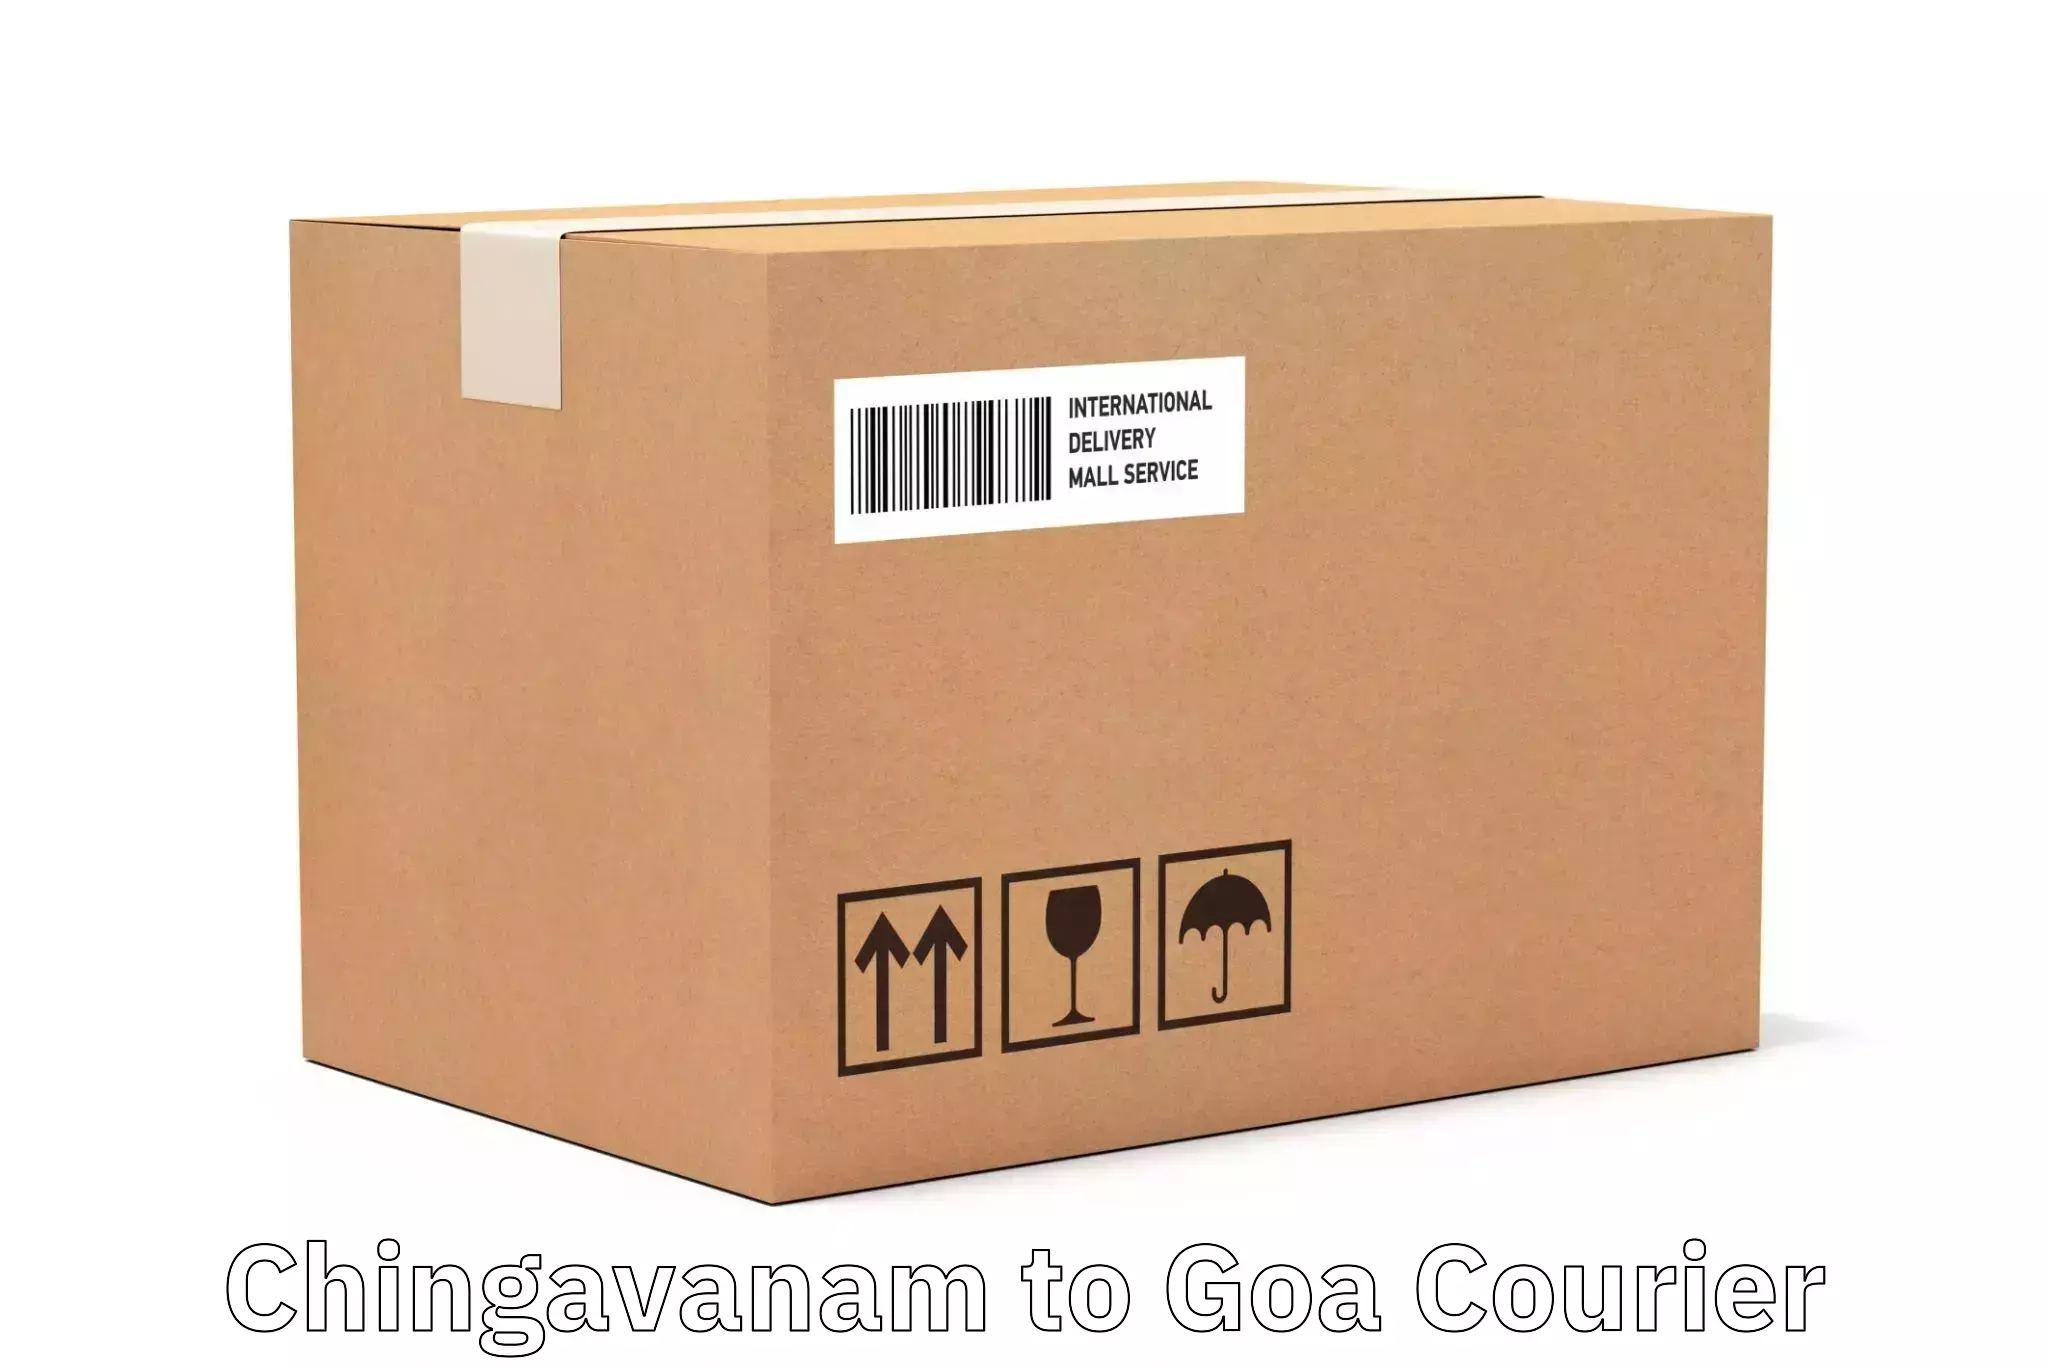 Nationwide delivery network Chingavanam to Goa